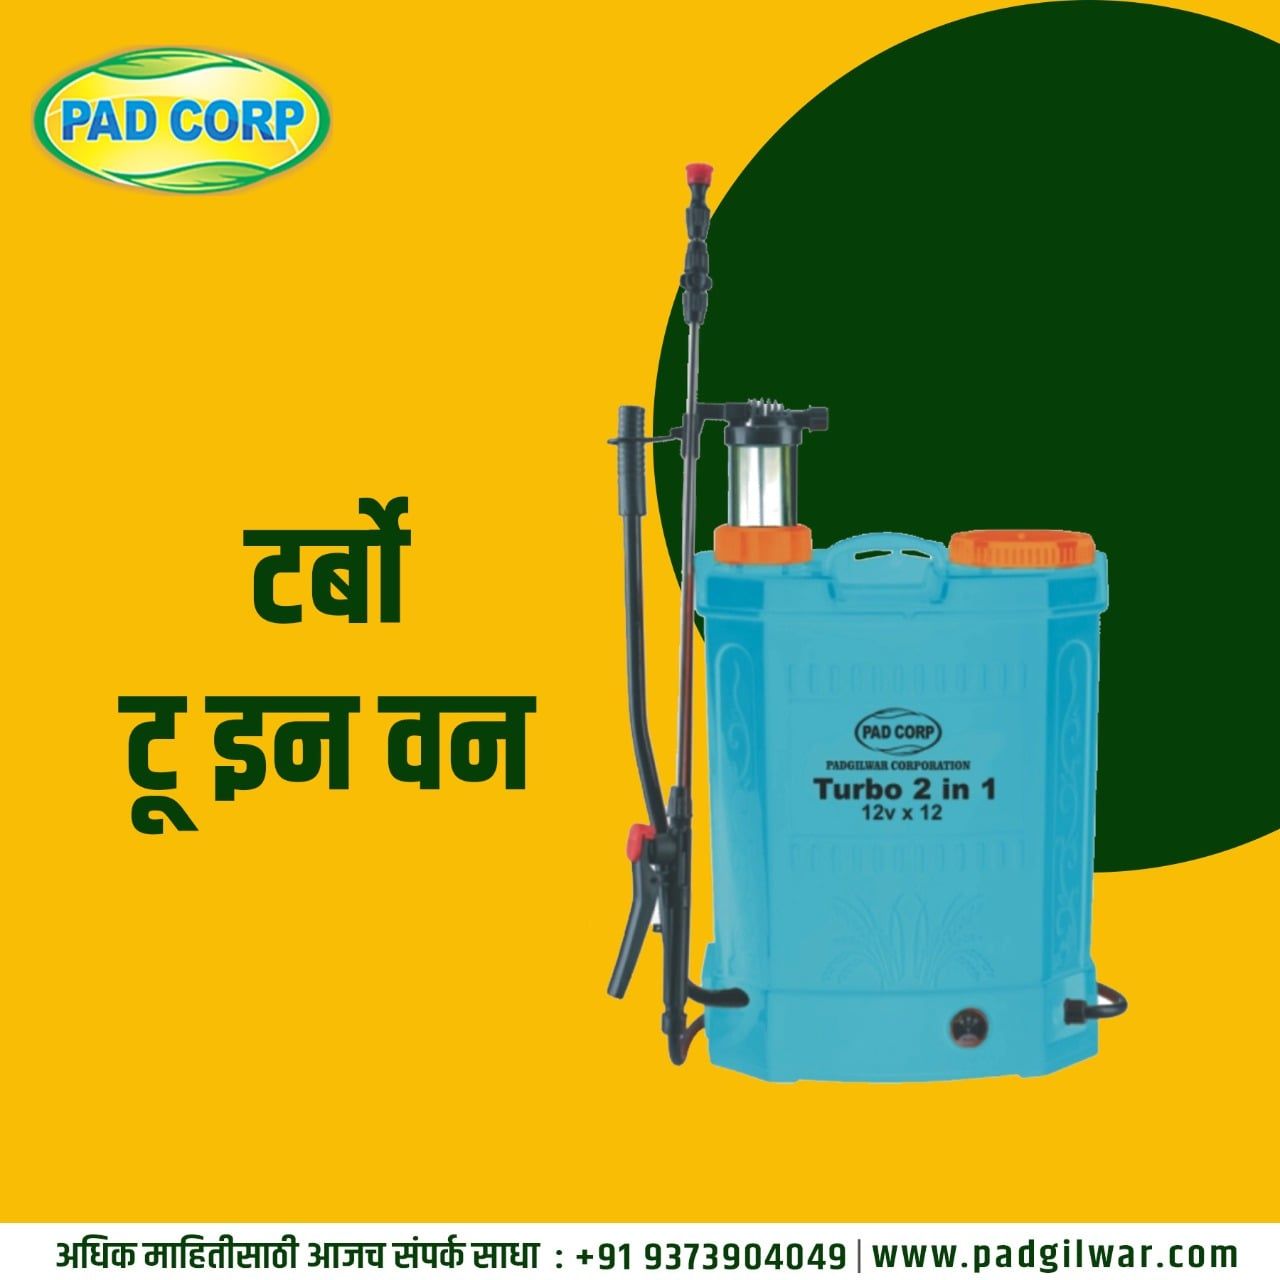 Padcorp battery sprayer for agriculture - Farmers choice